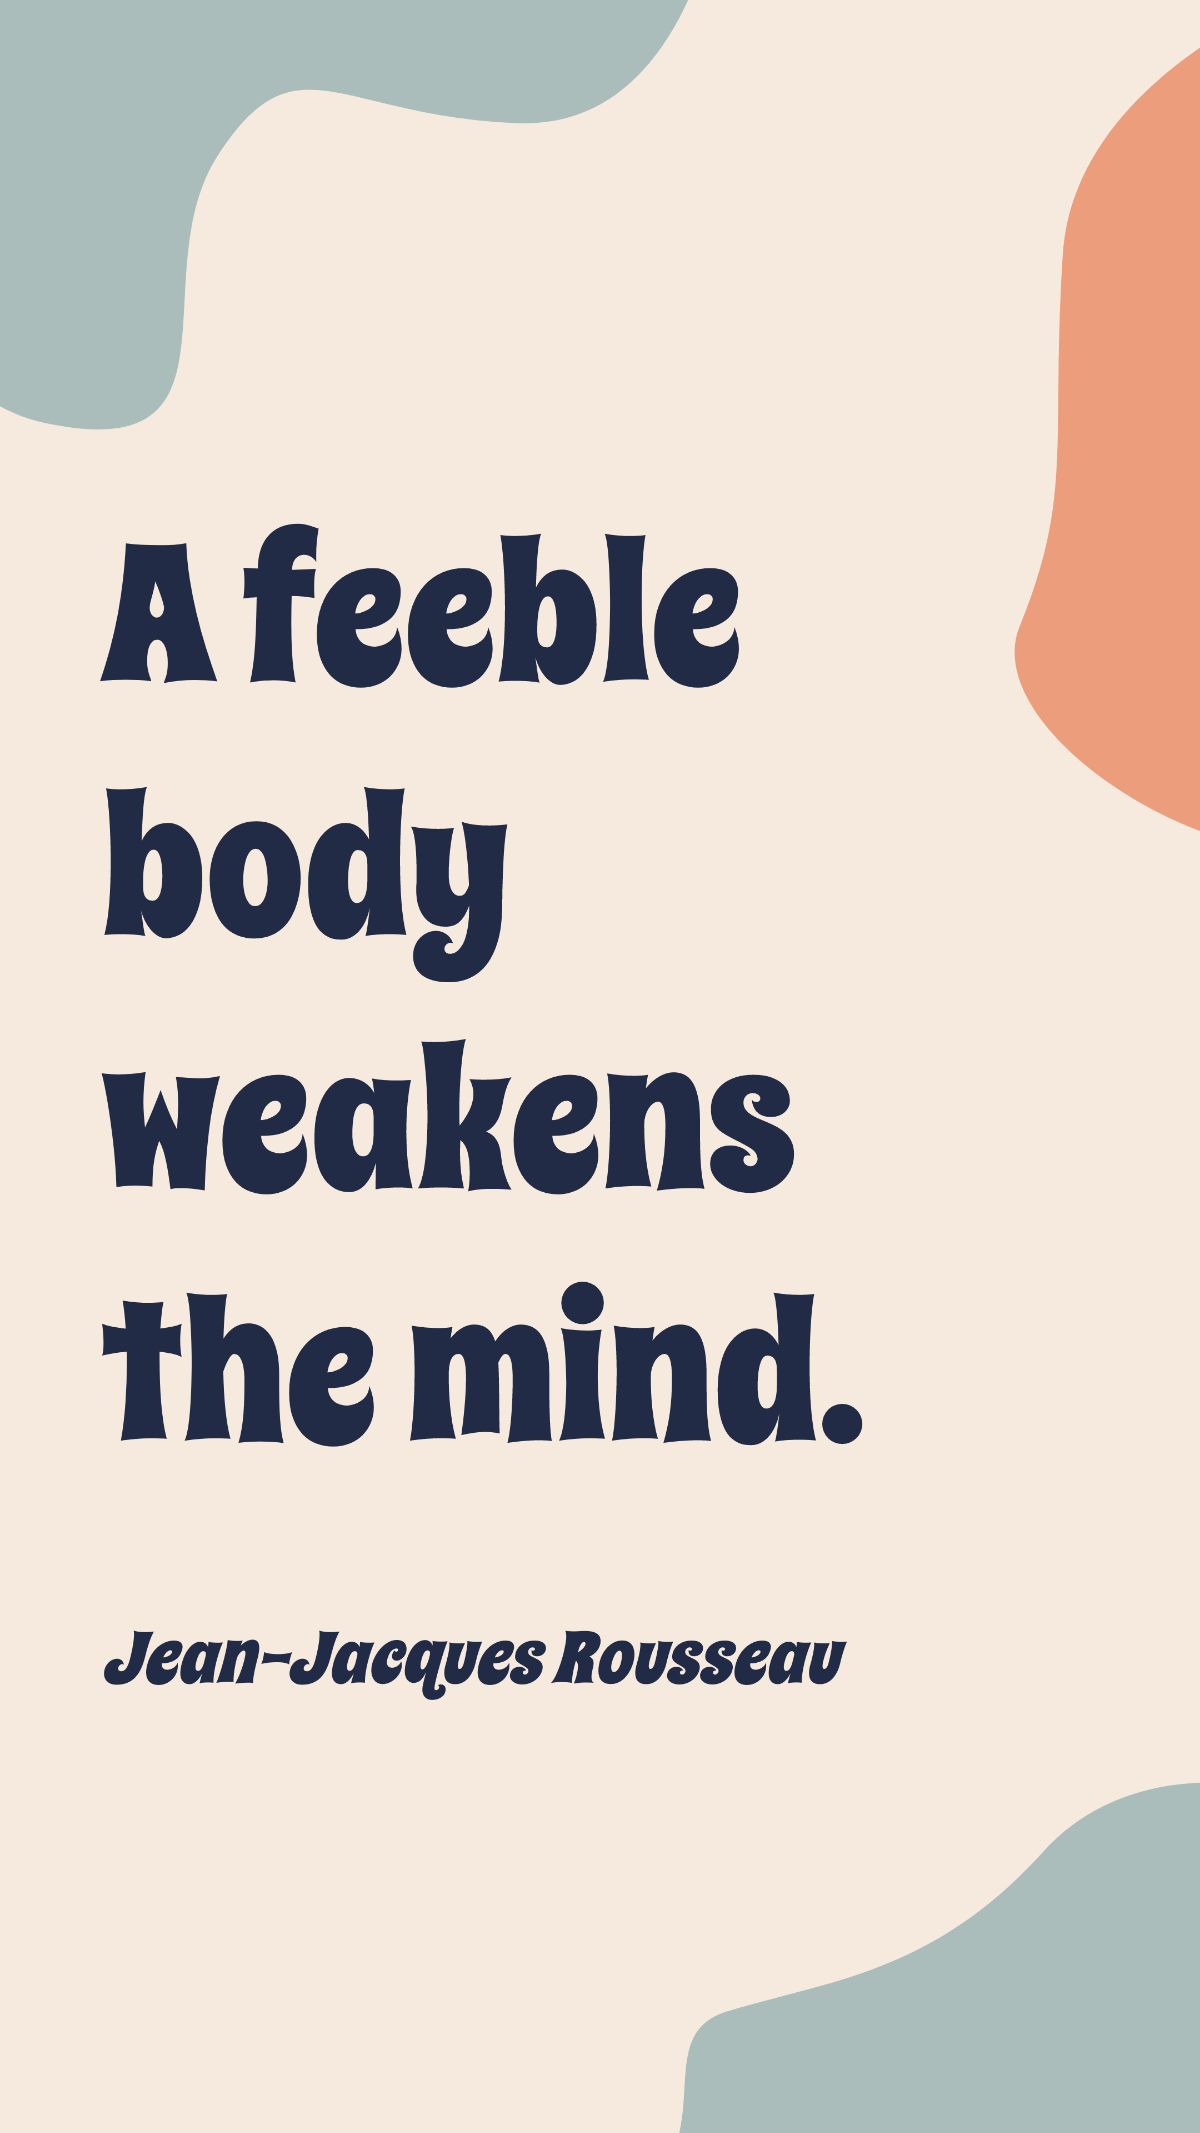 Jean-Jacques Rousseau - A feeble body weakens the mind. Template